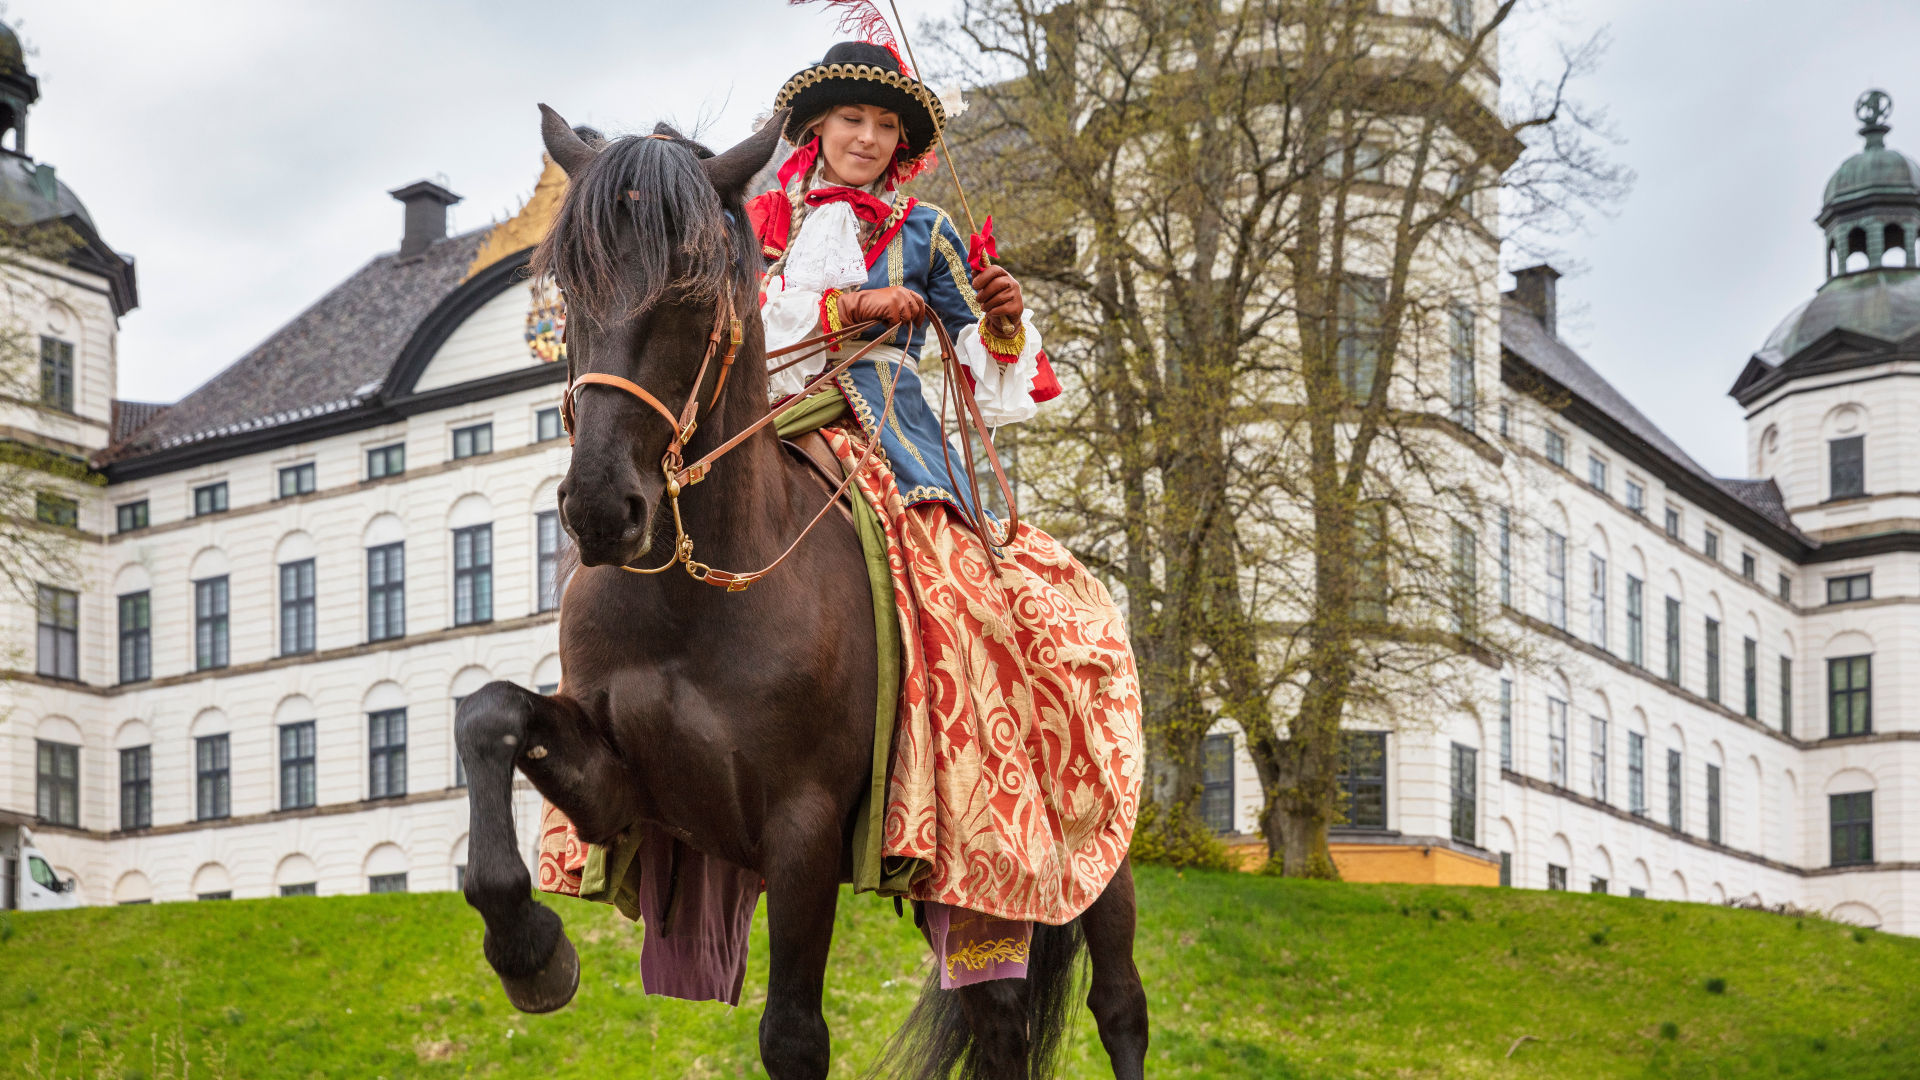  Rider in historical costume on brown horse in front of the castle.